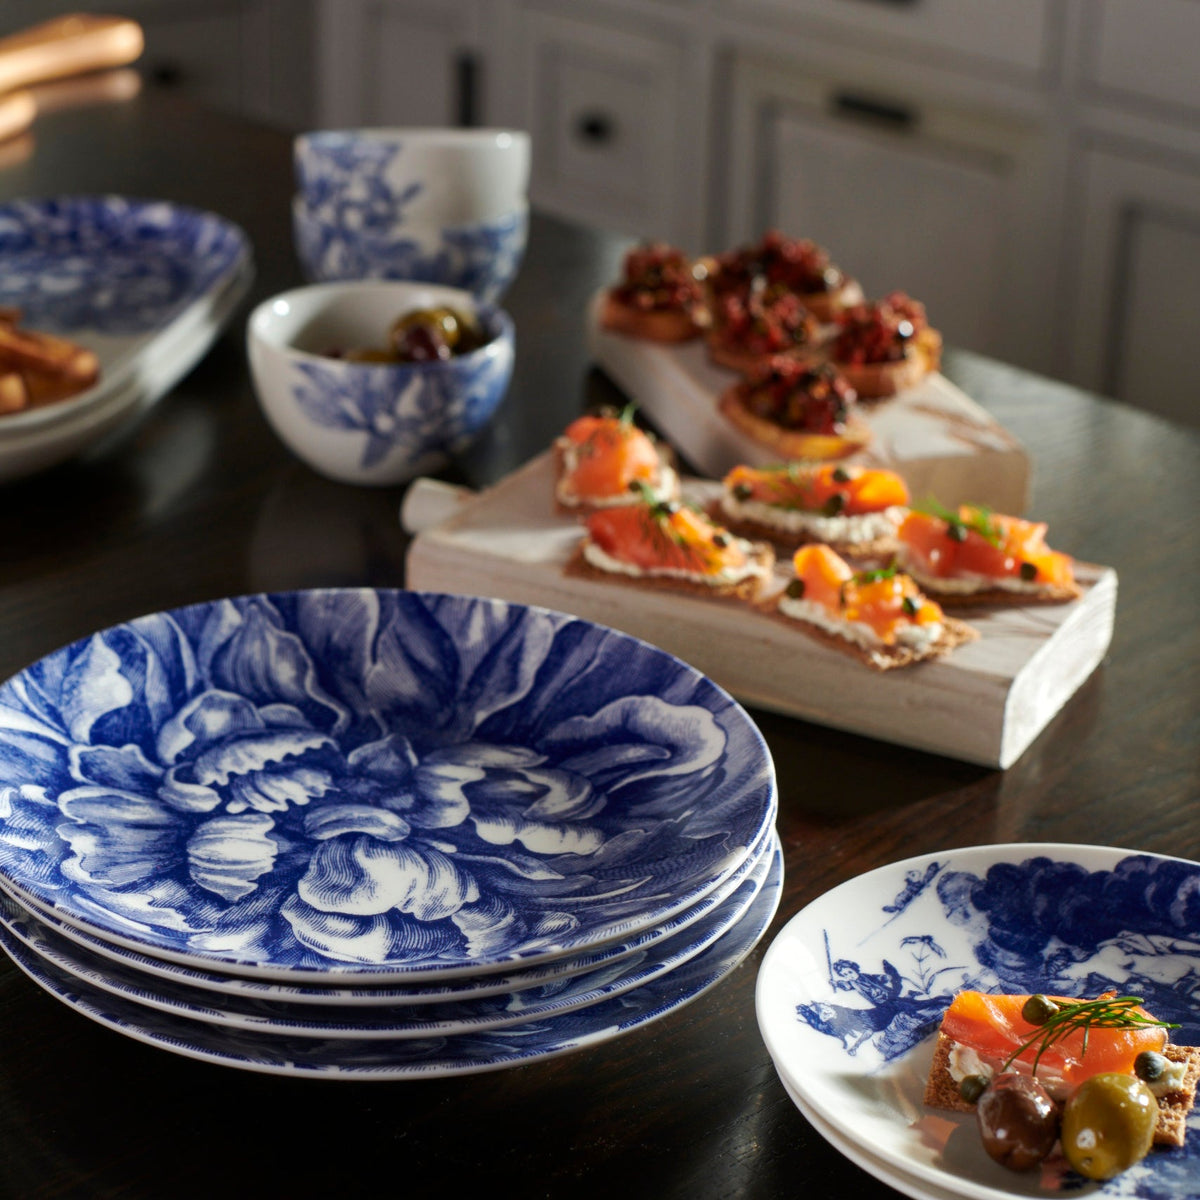 A set of Caskata Artisanal Home porcelain dinnerware plates, featuring a delicate Peony Full Bloom Coupe Salad Plate pattern, arranged neatly on a table.